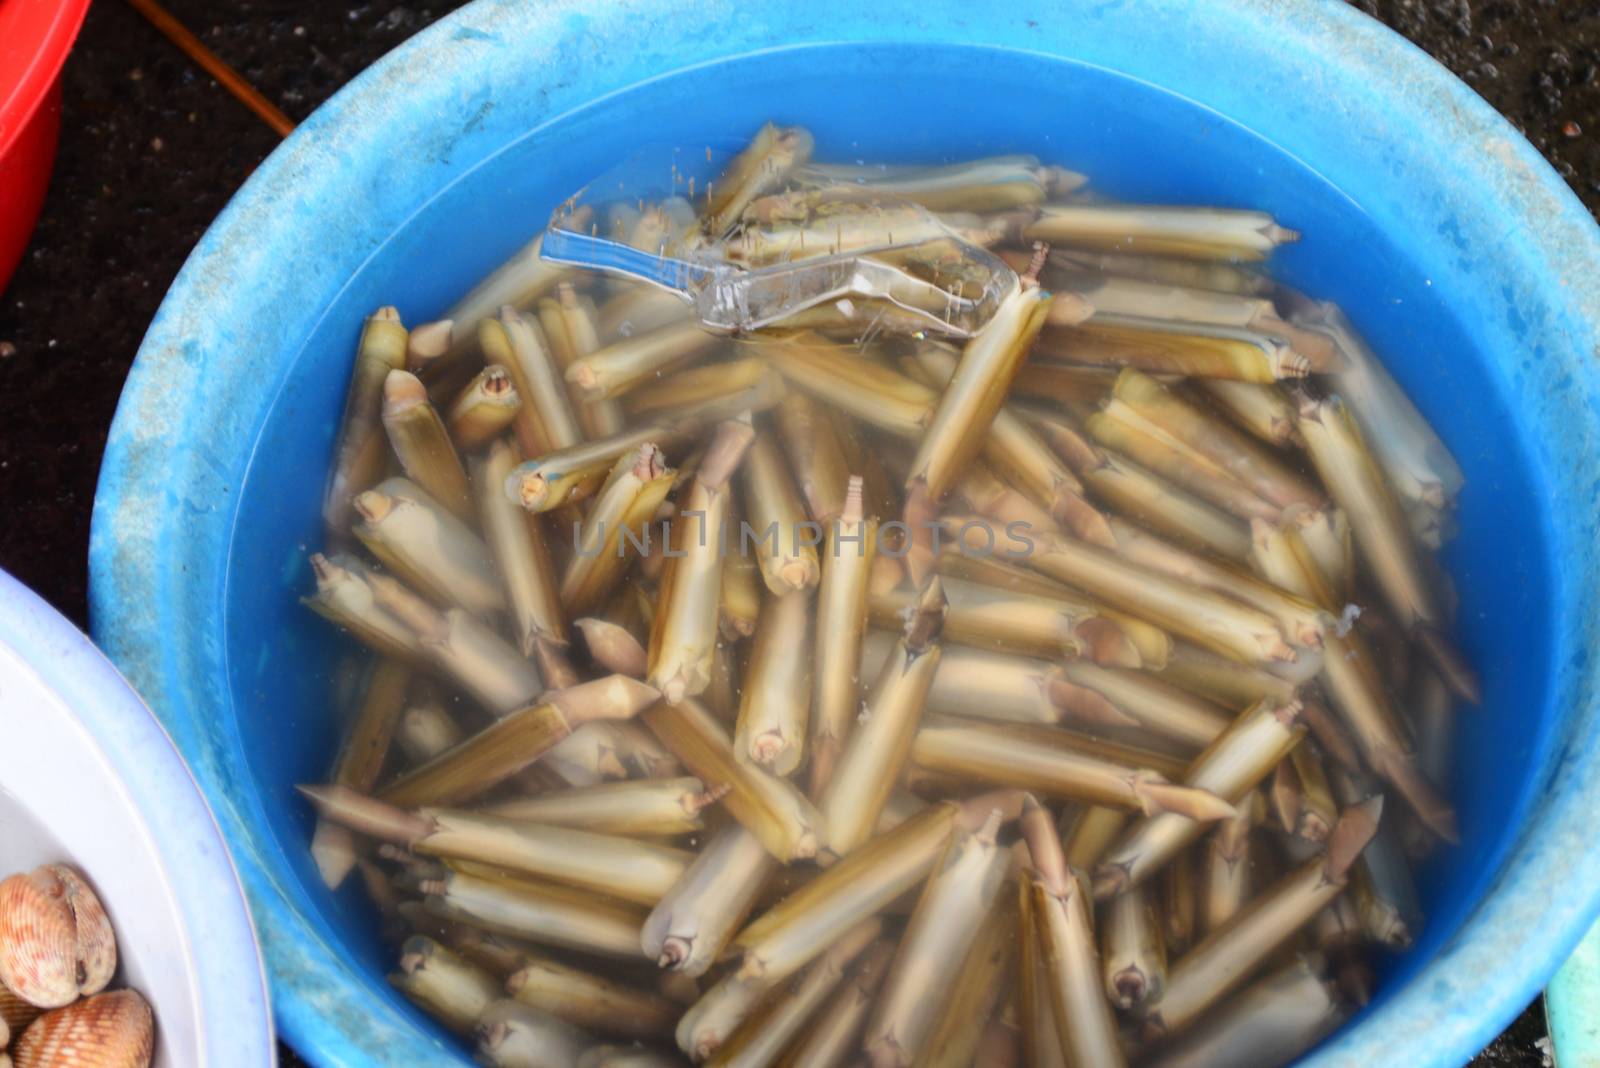 Razor clam Sell in fresh seafood market, note subject is blurry